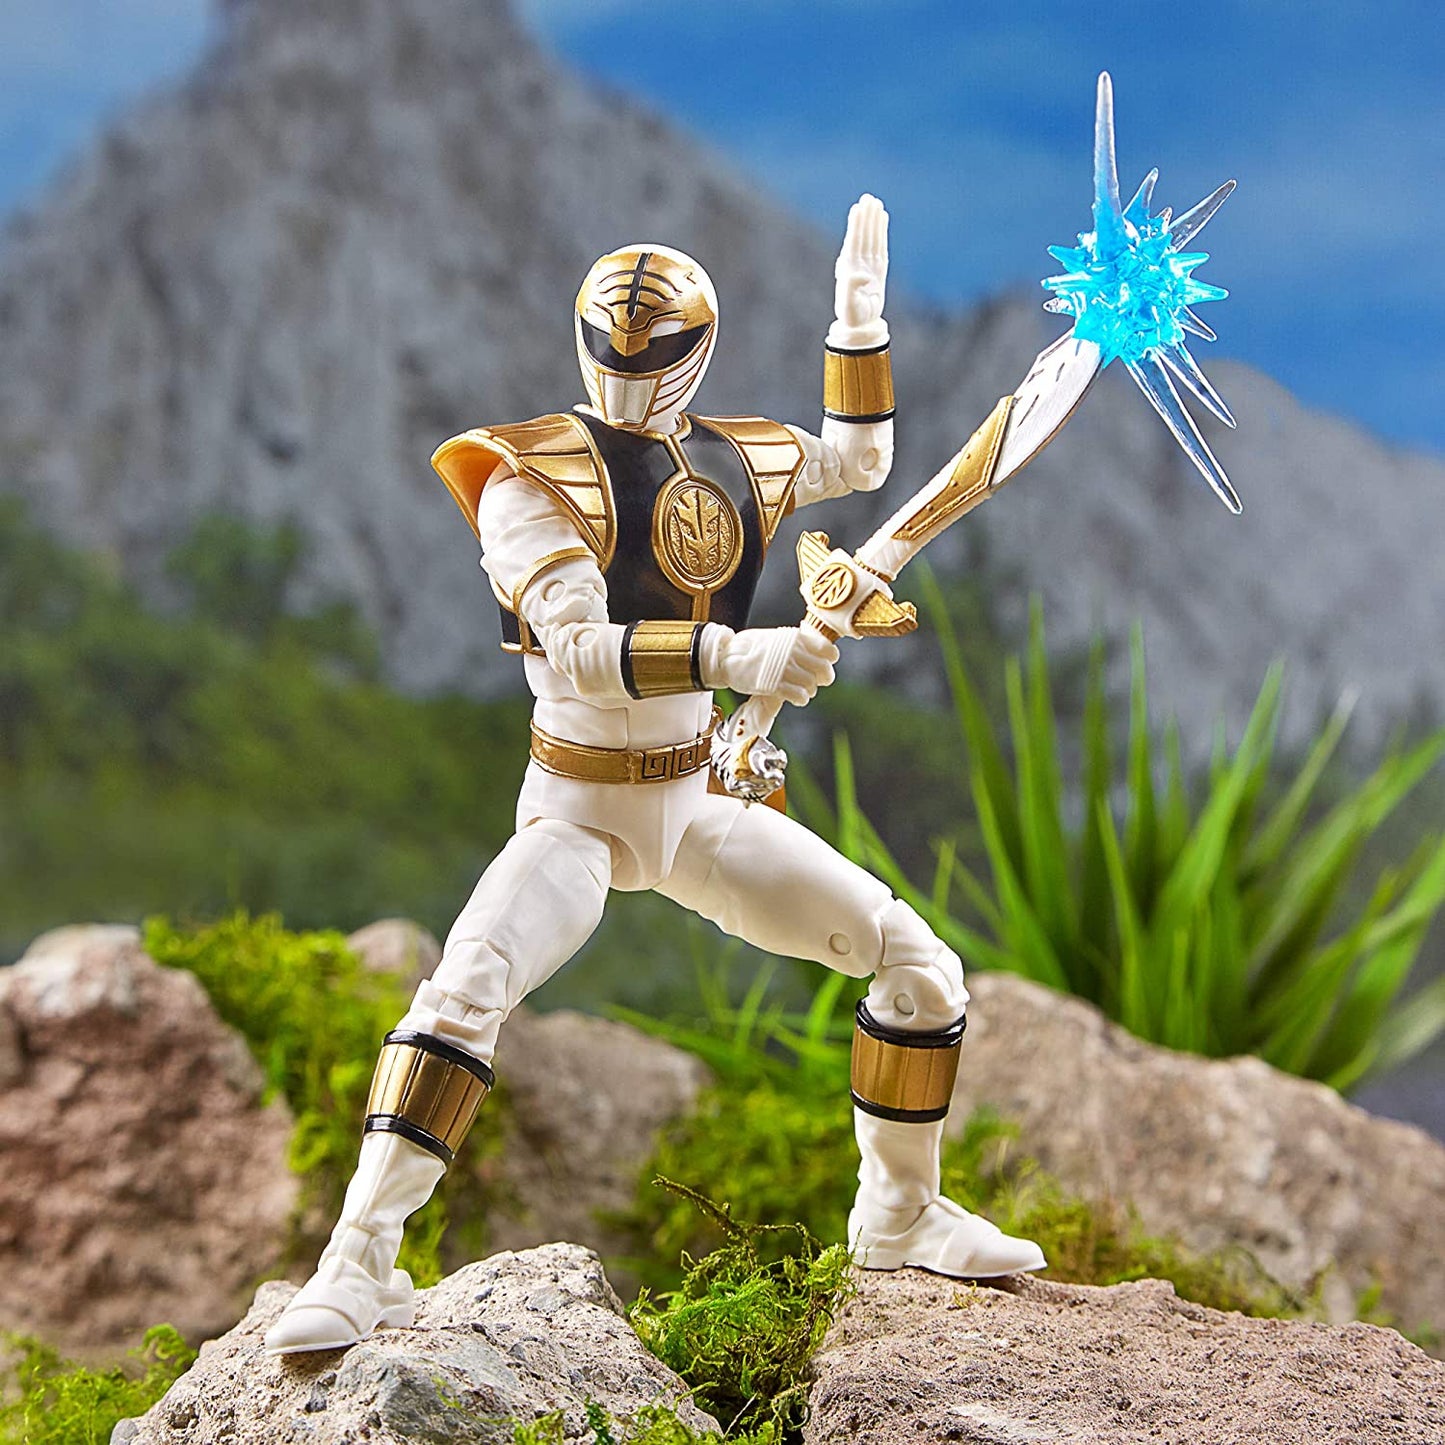 Power Rangers Lightning Collection 6" Mighty Morphin White Ranger Collectible Action Figure